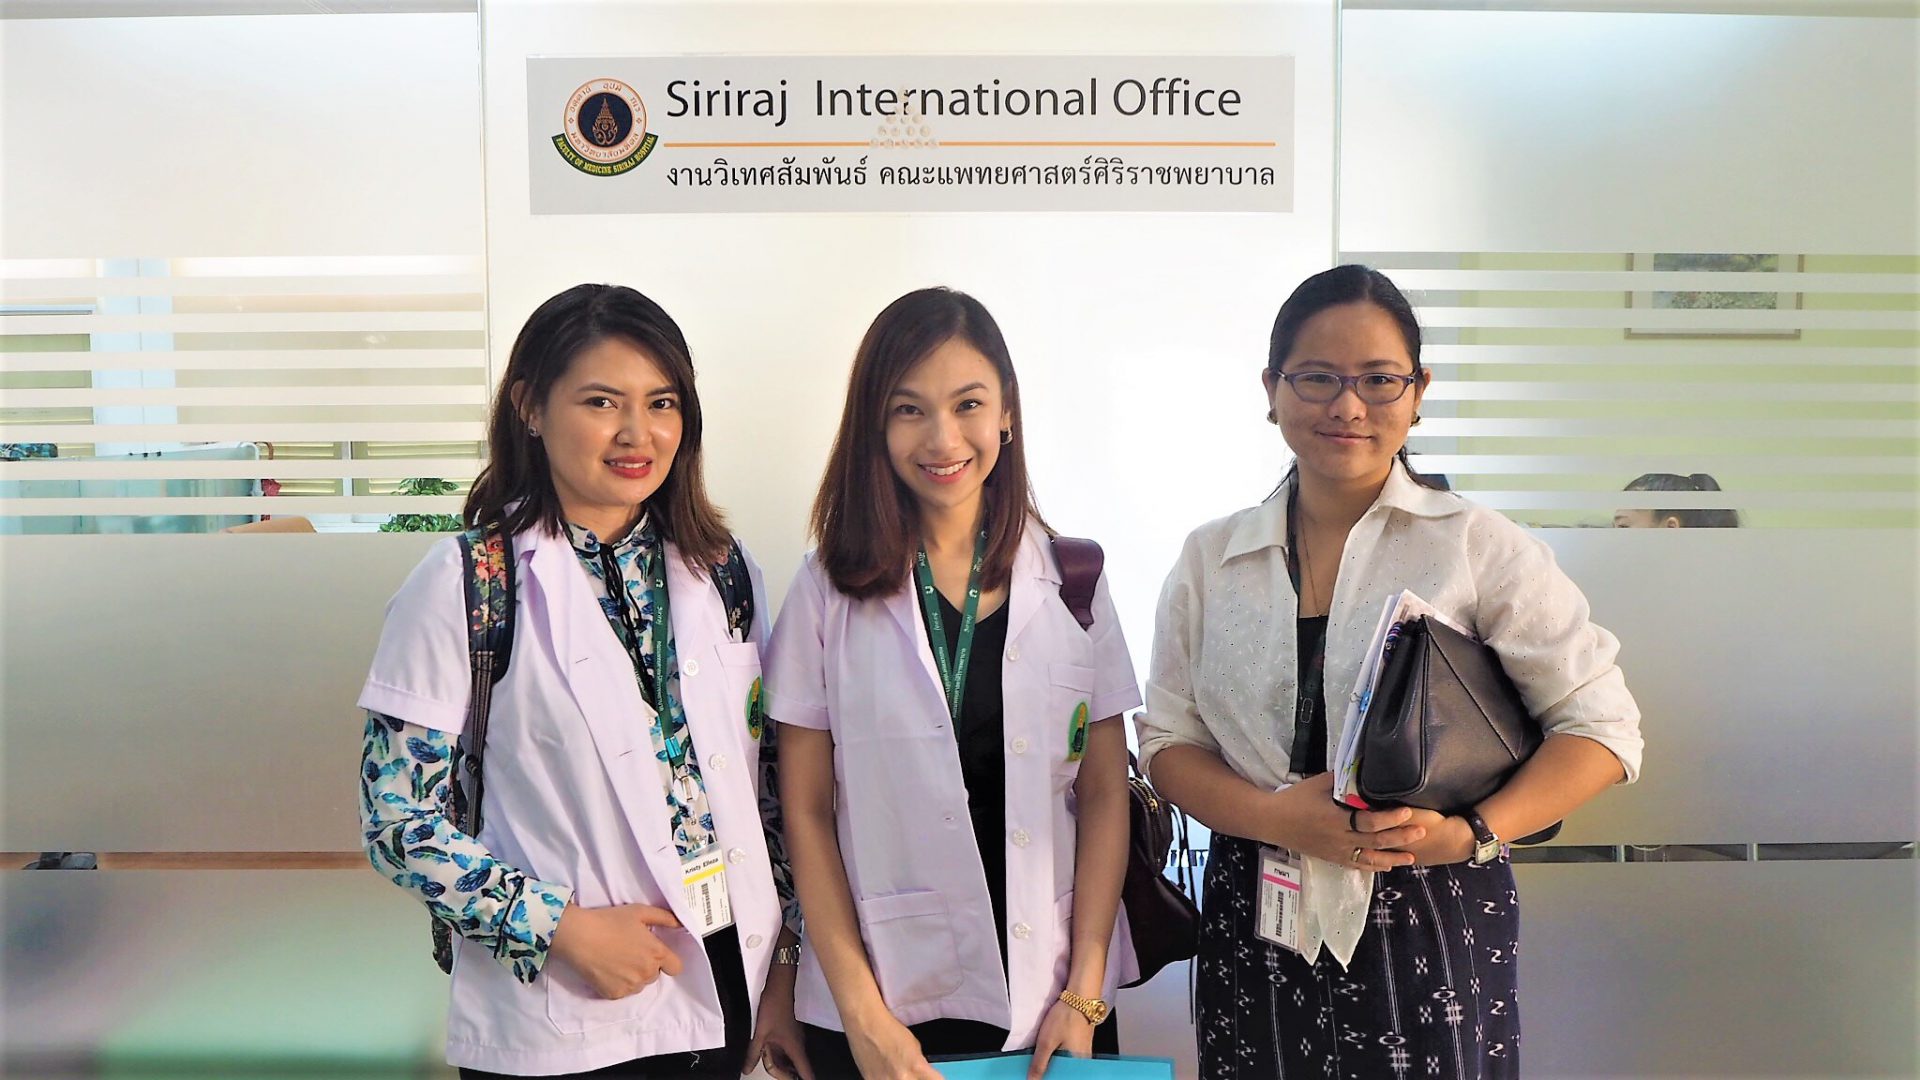 Residents from the Philippines undertook the Dermatology Fellowship Training at Siriraj